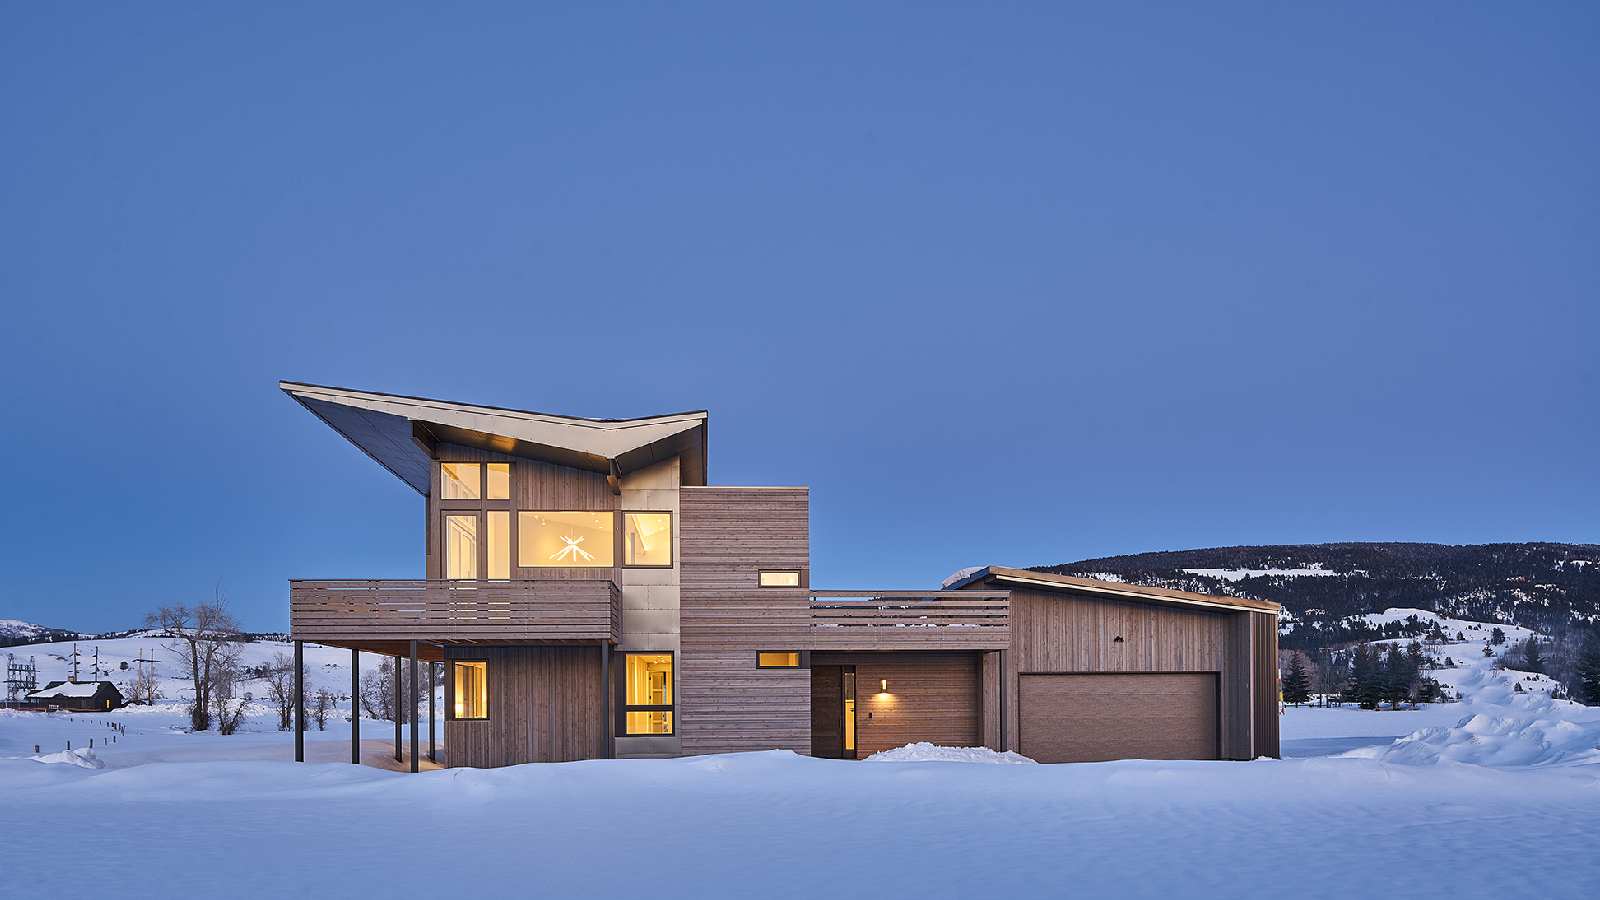 Full property view of Antelope Flats, a custom home designed and built by Farmer Payne Architects.